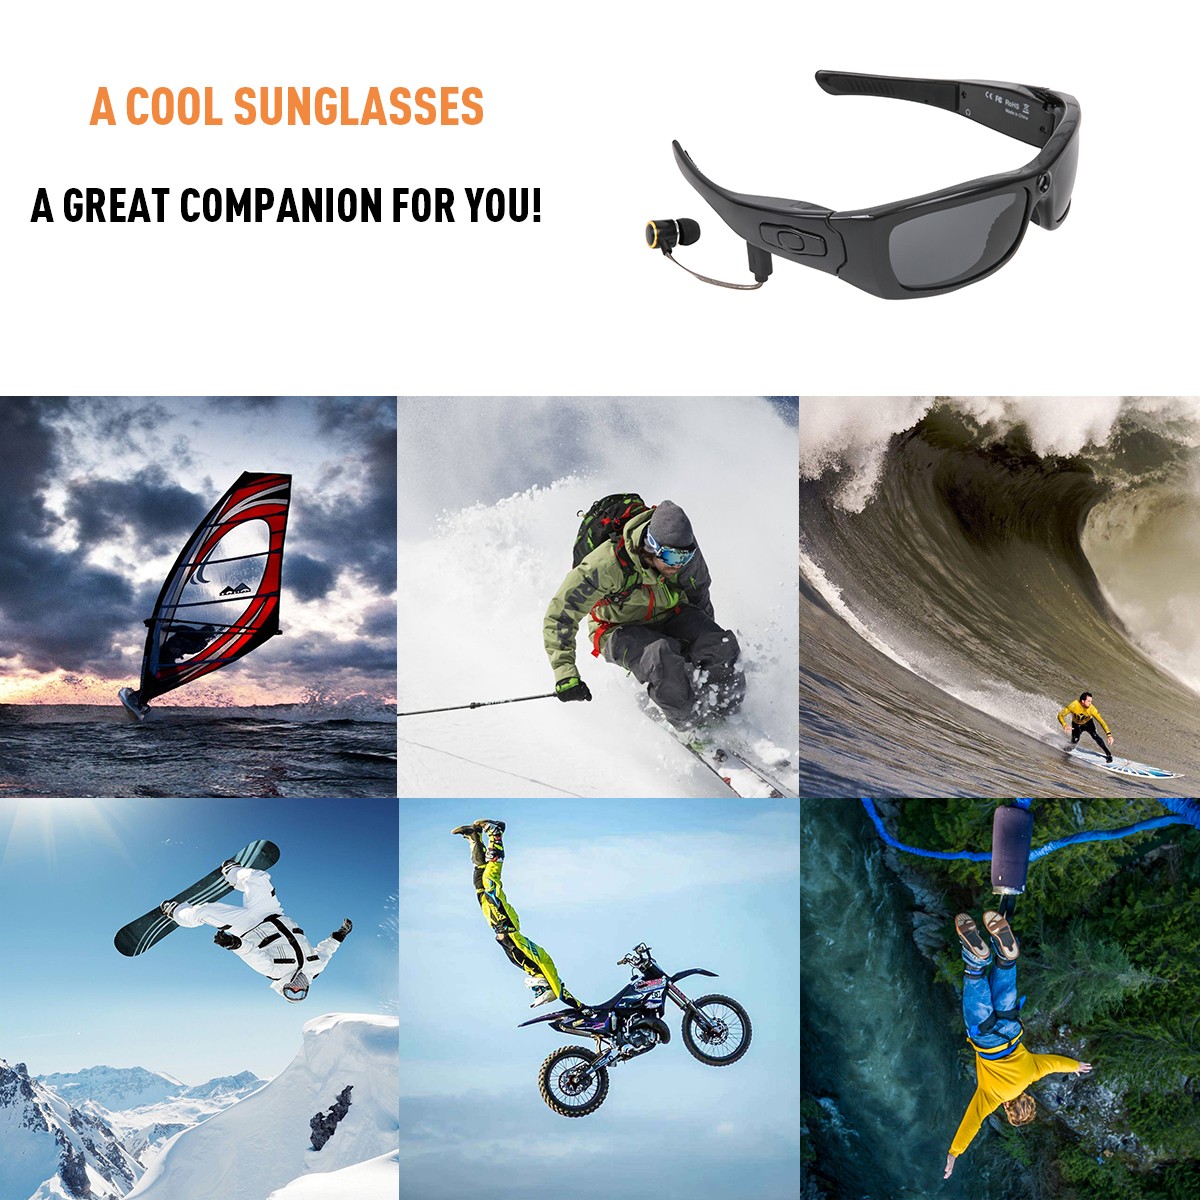 Pengwing-Wireless Hd1080 Electronic Outdoor Bluetooth Smart Glasses-3